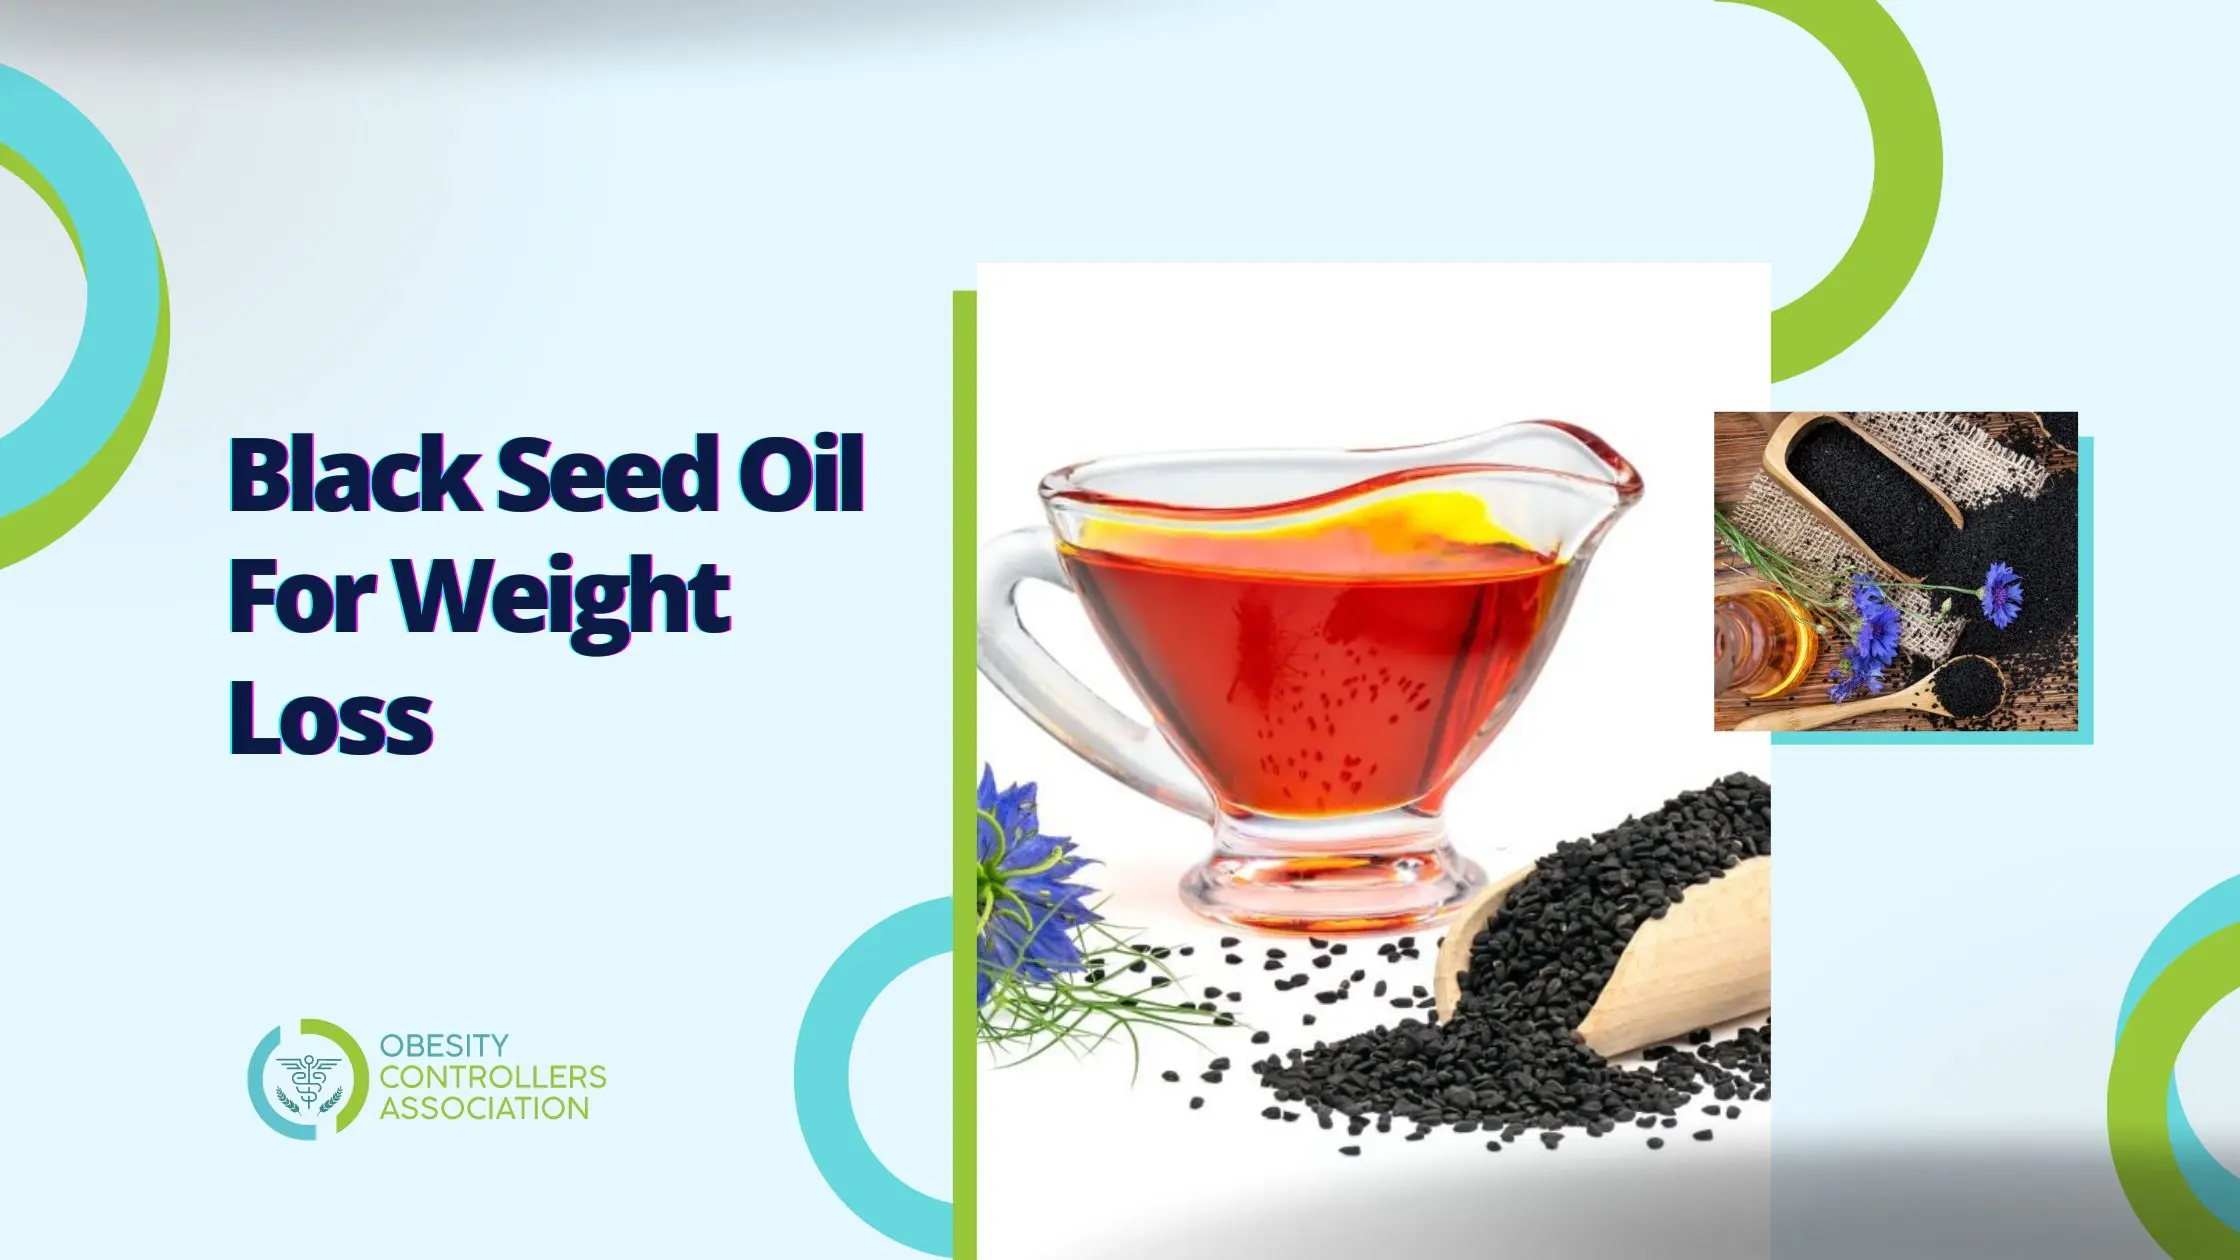 Black Seed Oil For Weight Loss